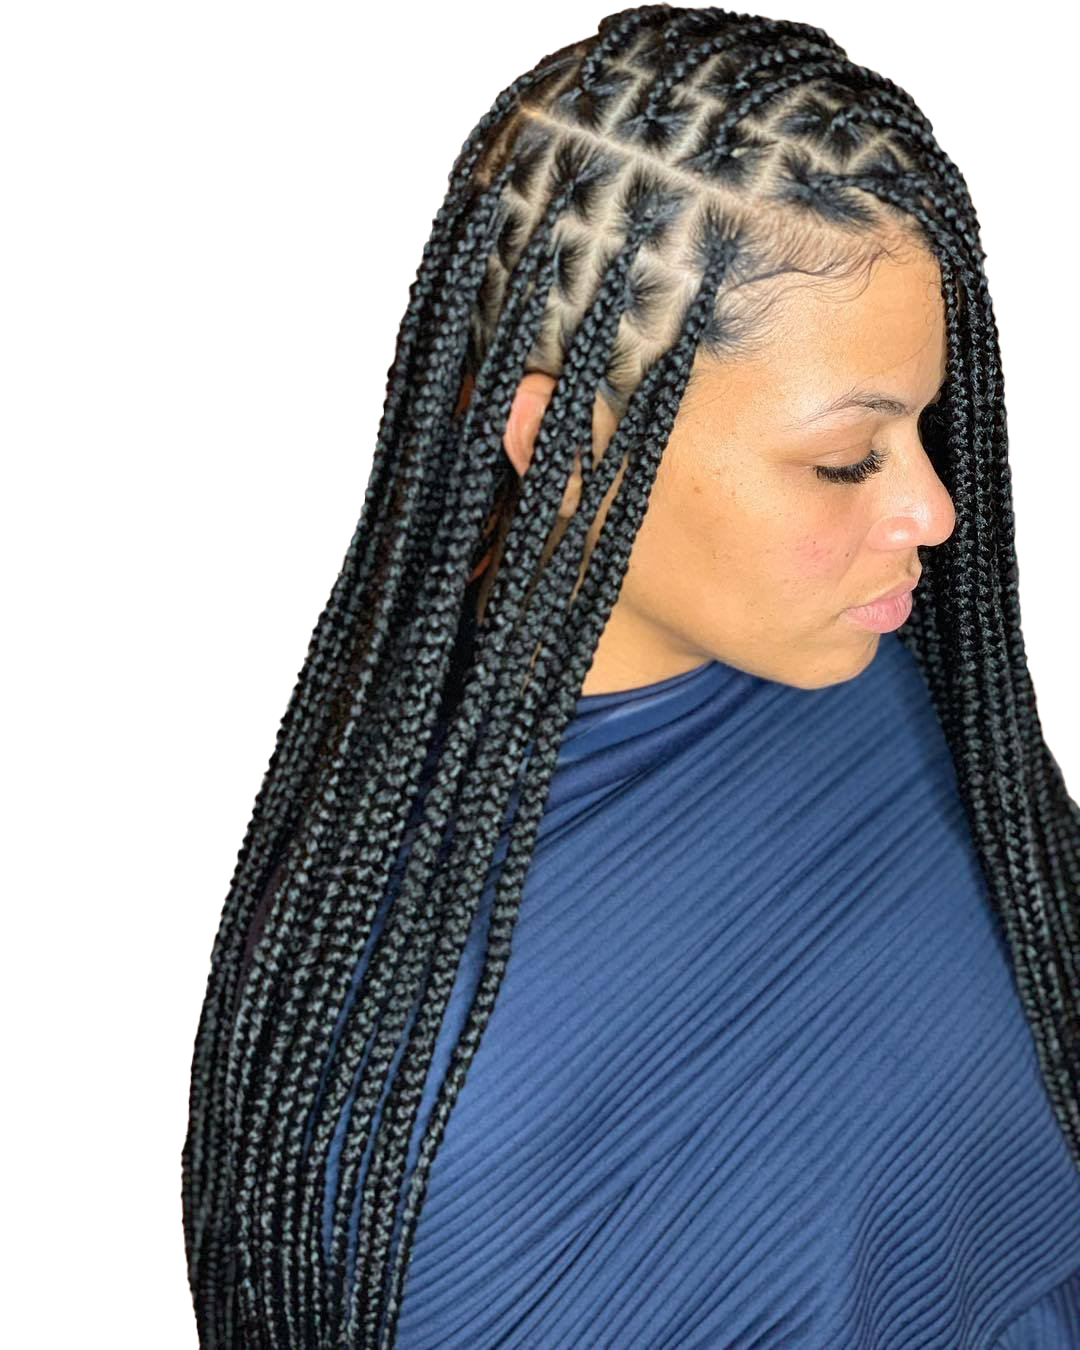 Download PNG image - Braids Hairstyle PNG Transparent Picture 